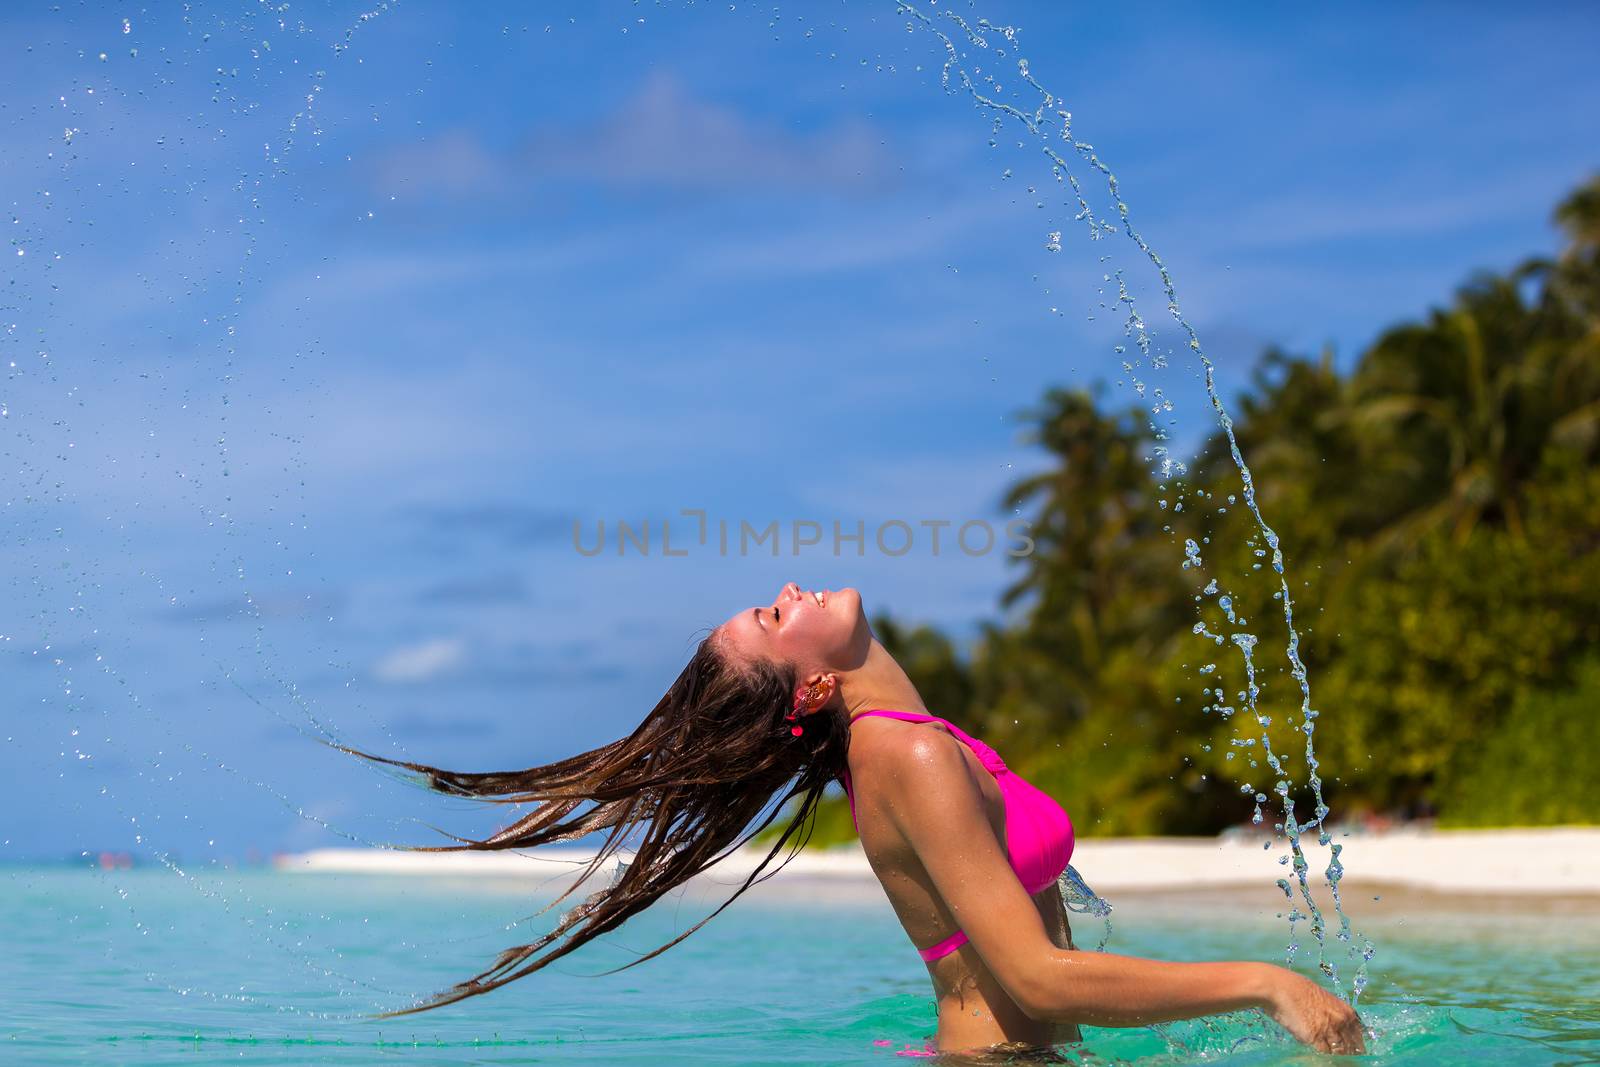 Maldives, a young woman throwing back her hair